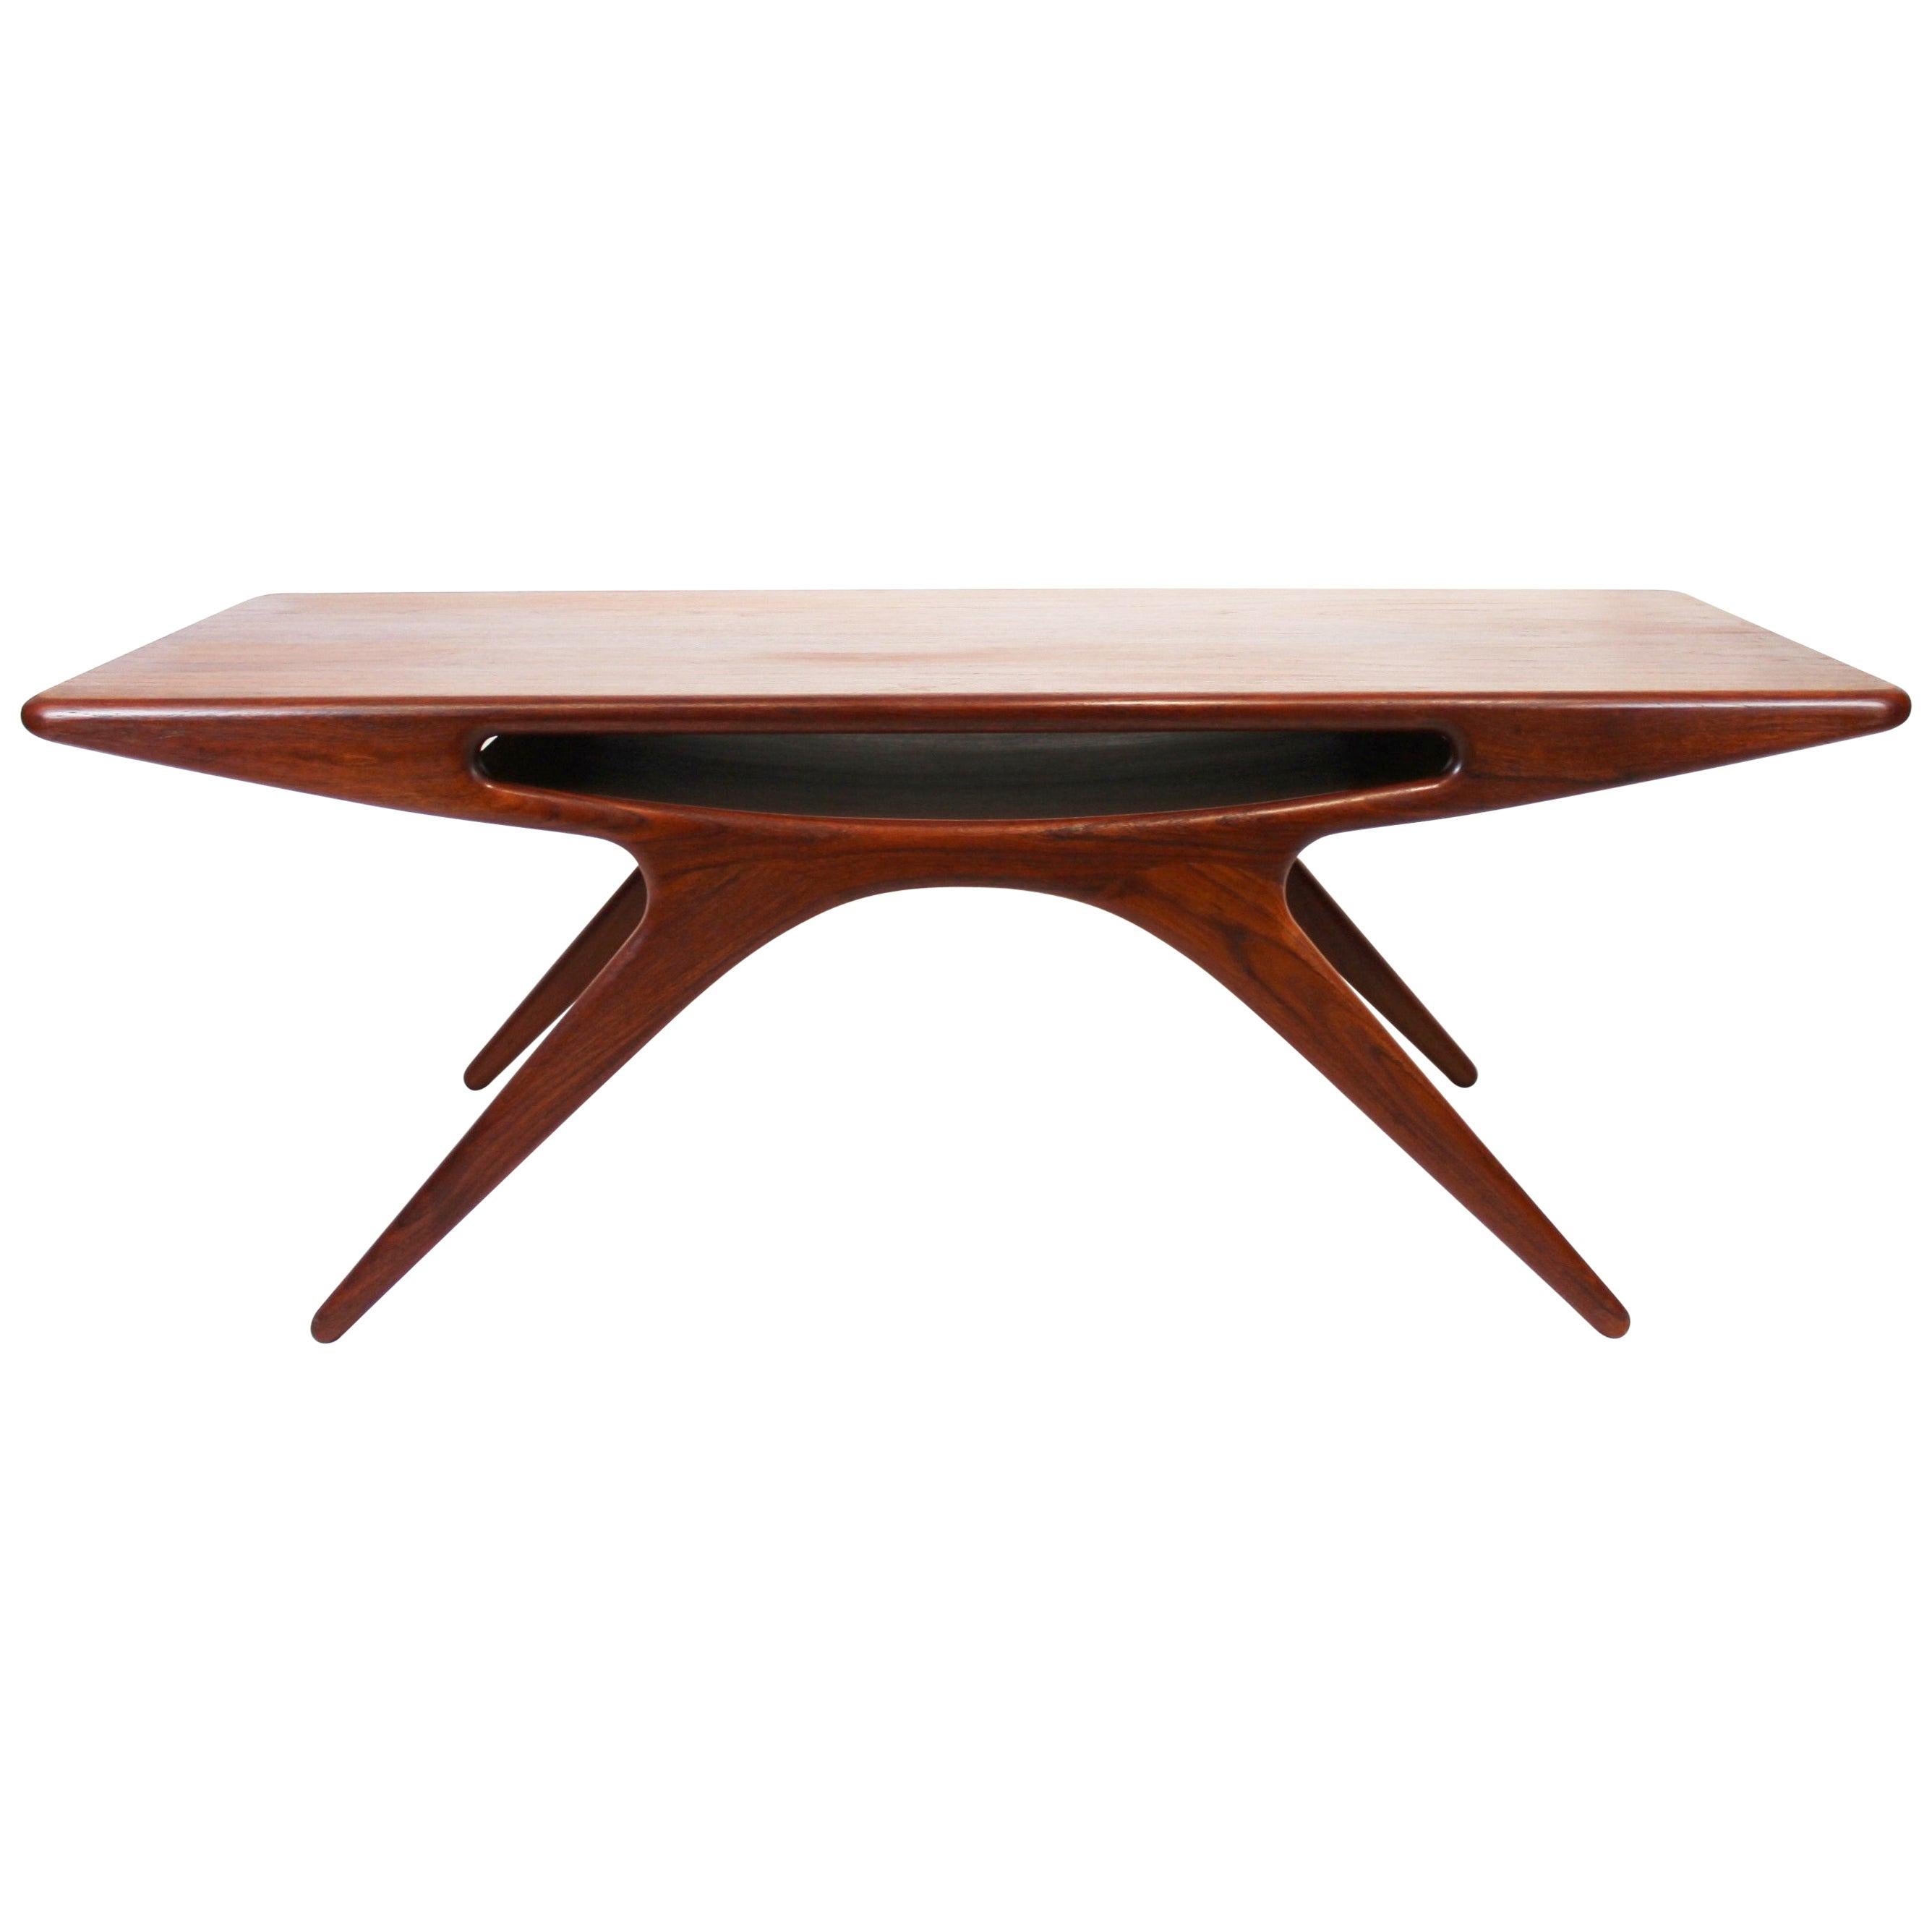 Coffee Table, "The smile" in Teak Designed by Johannes Andersen, 1960s